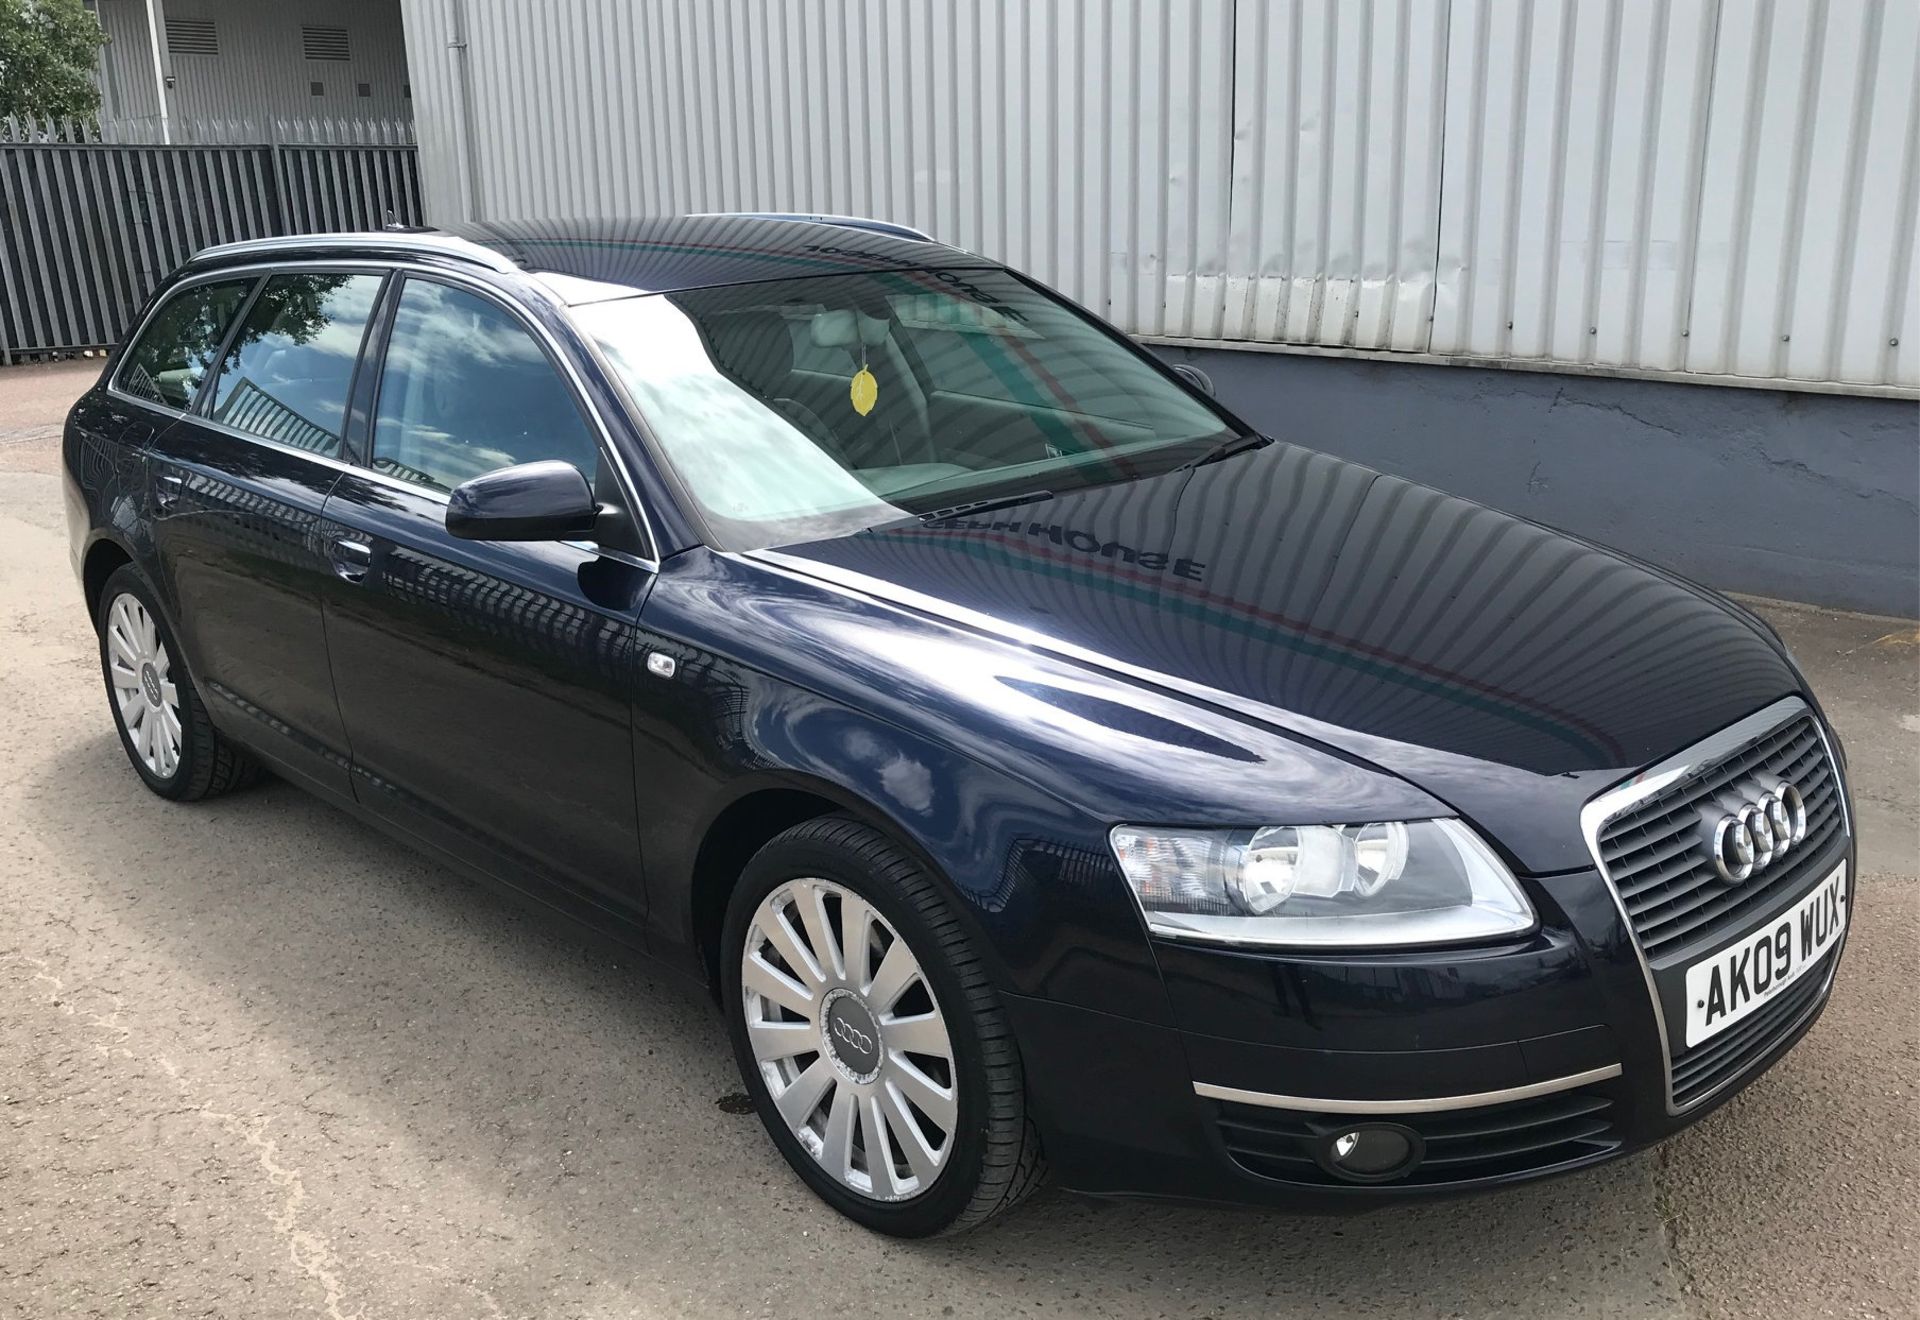 2009 Audi A6 2.0 Tdi Le 5 Door Estate - CL505 - NO VAT ON THE HAMMER - Location: Corby, Northamptons - Image 13 of 19